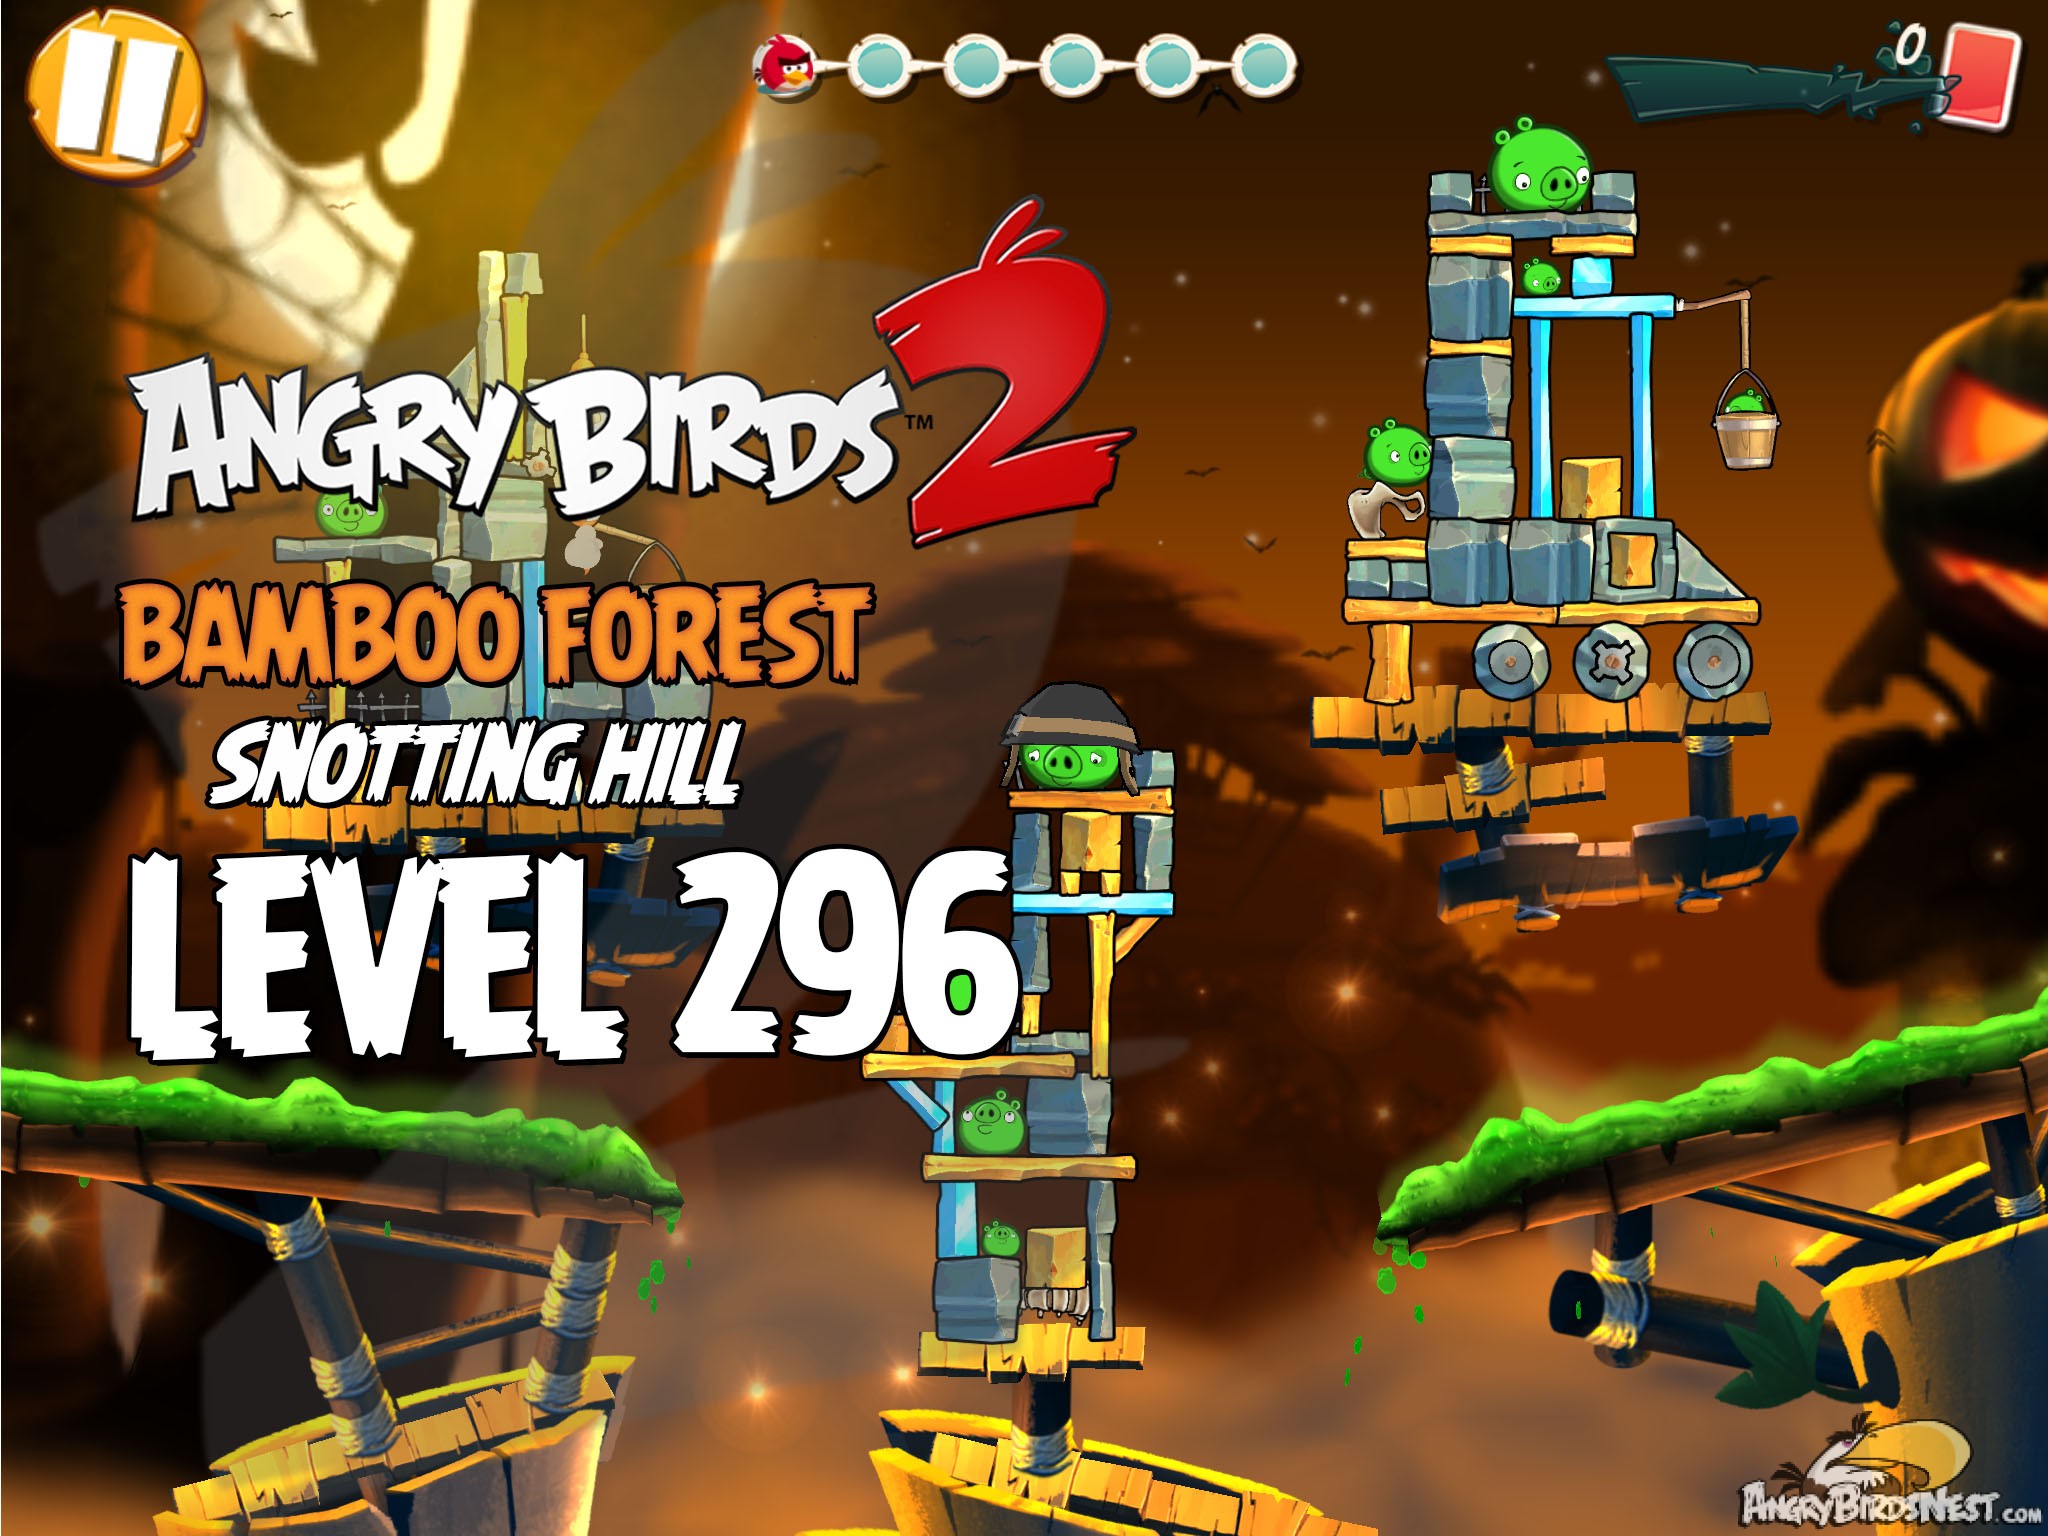 Angry Birds 2 Bambbo Forest Snotting Hill Level 296